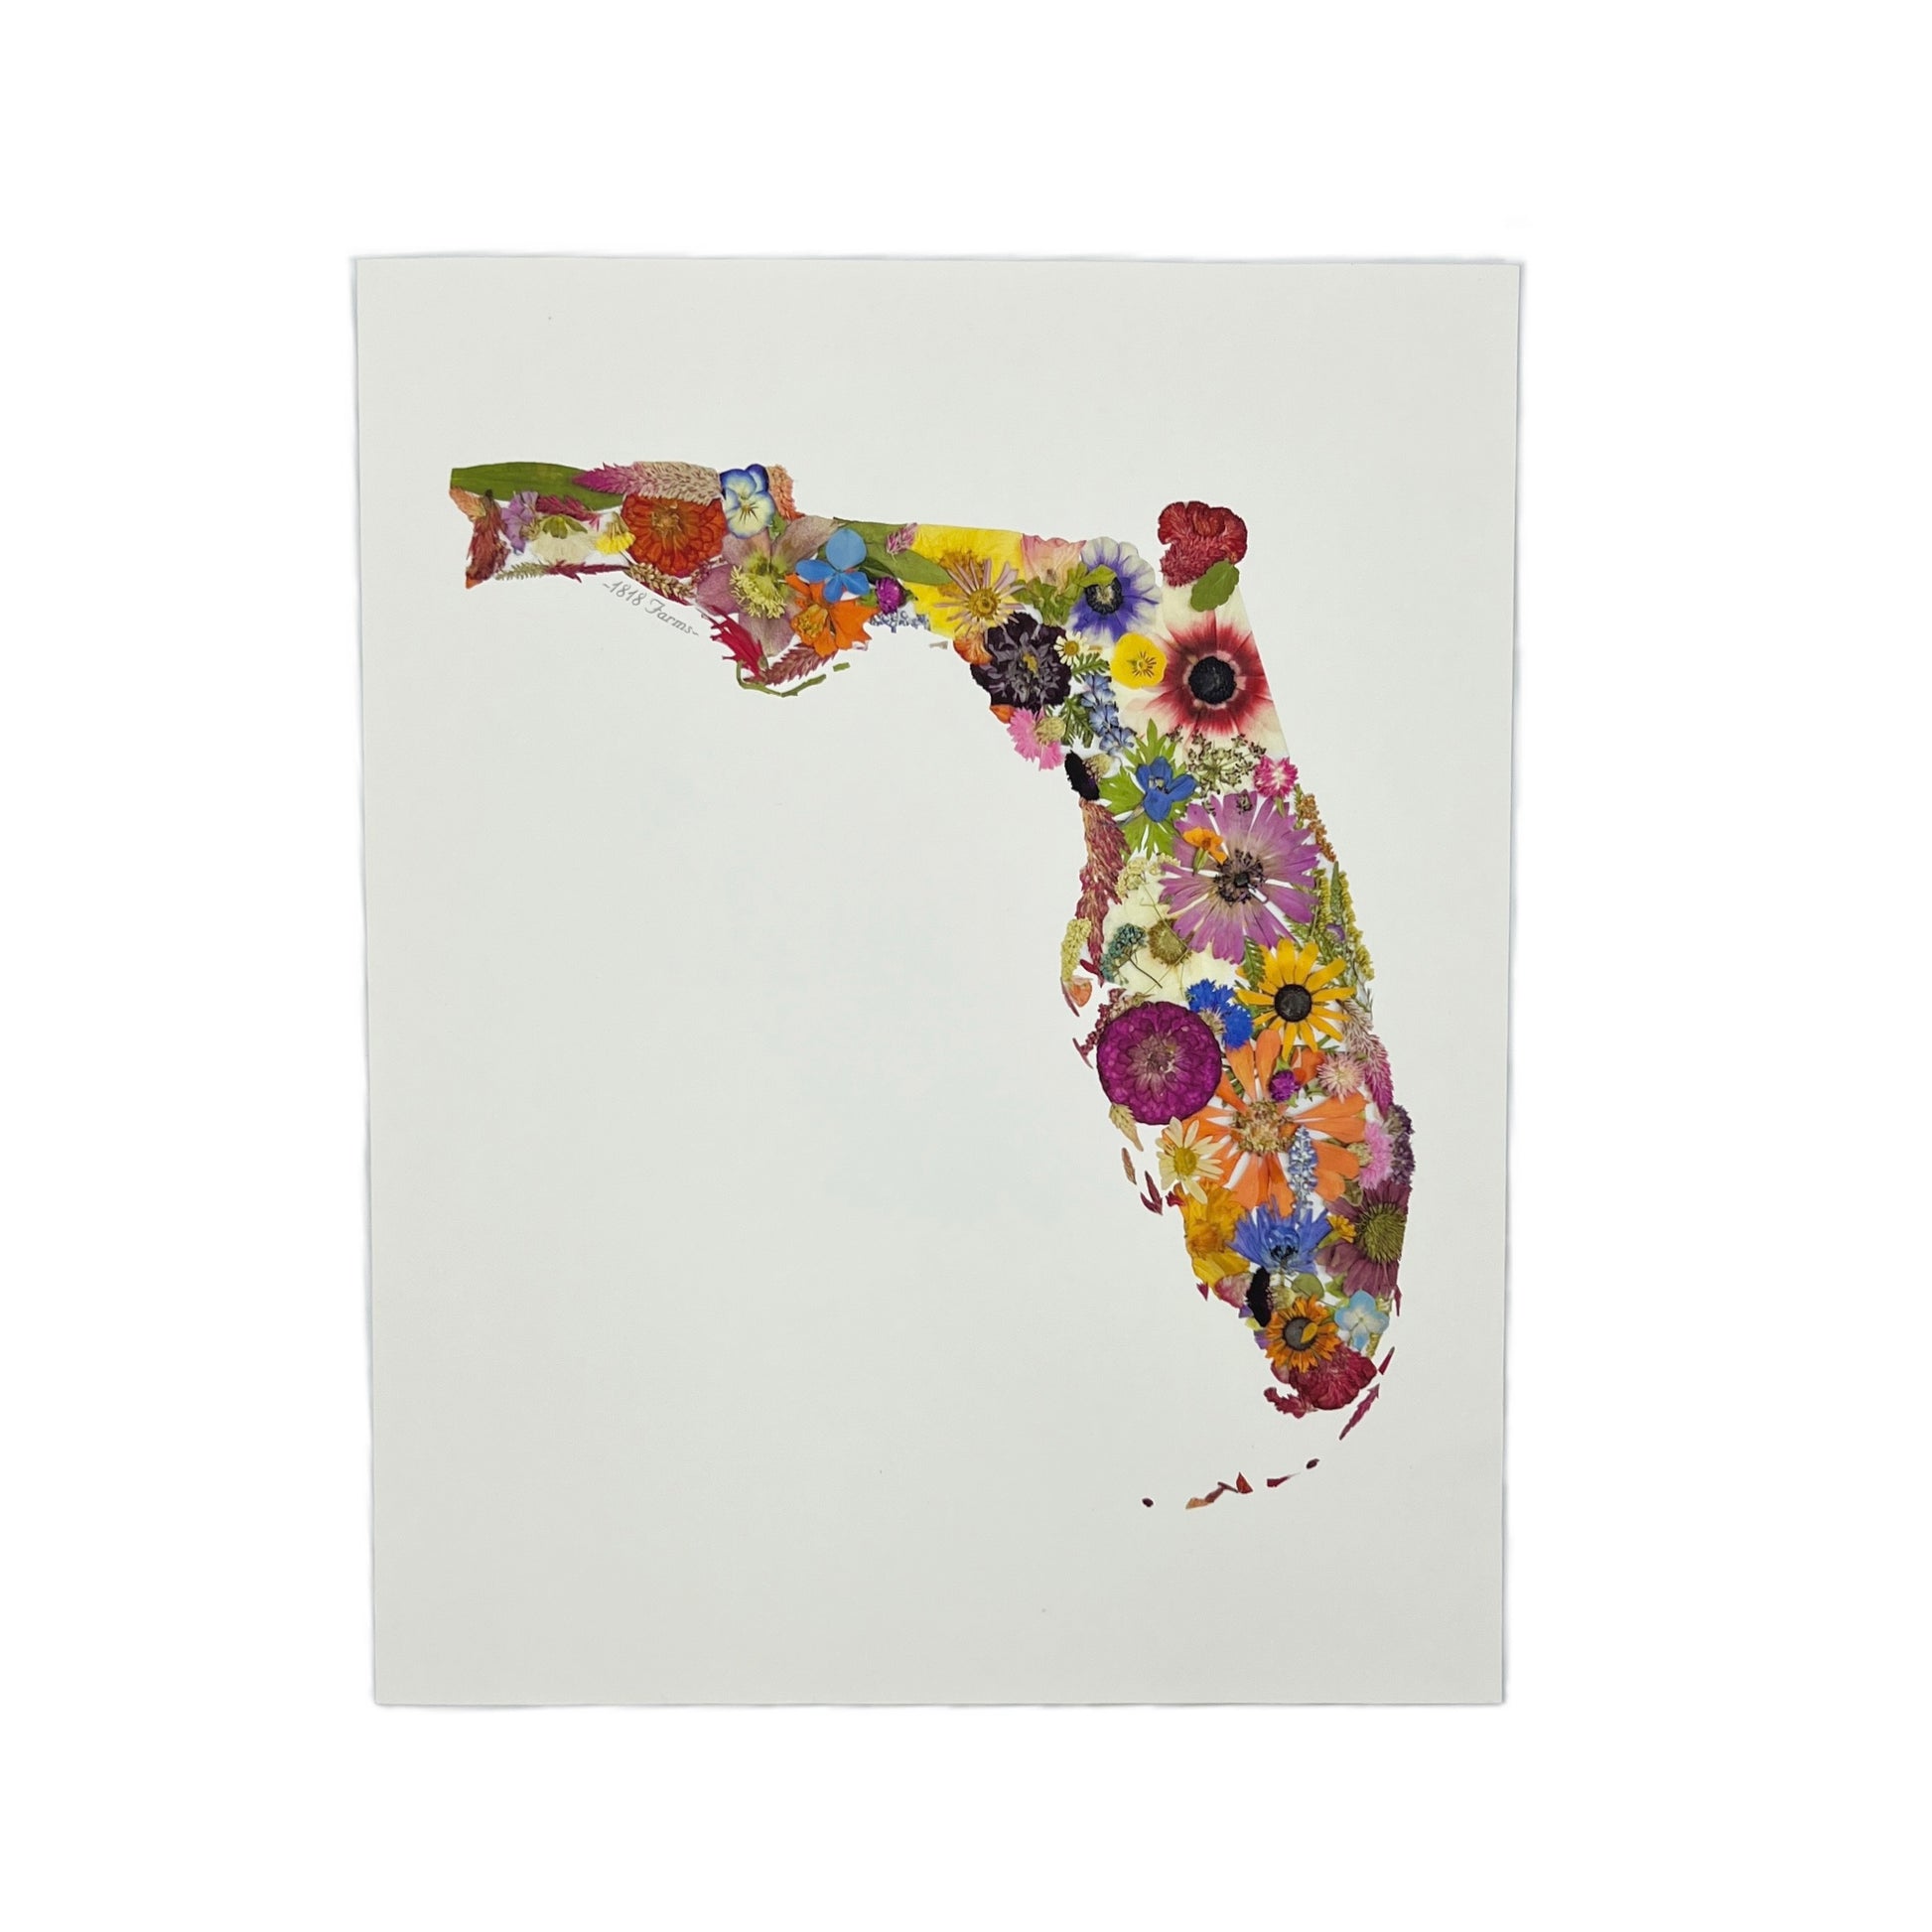 State Themed Giclée Print Featuring Dried, Pressed Flowers - "Where I Bloom" Collection Giclee Art Print 1818 Farms 11"x14" Florida 